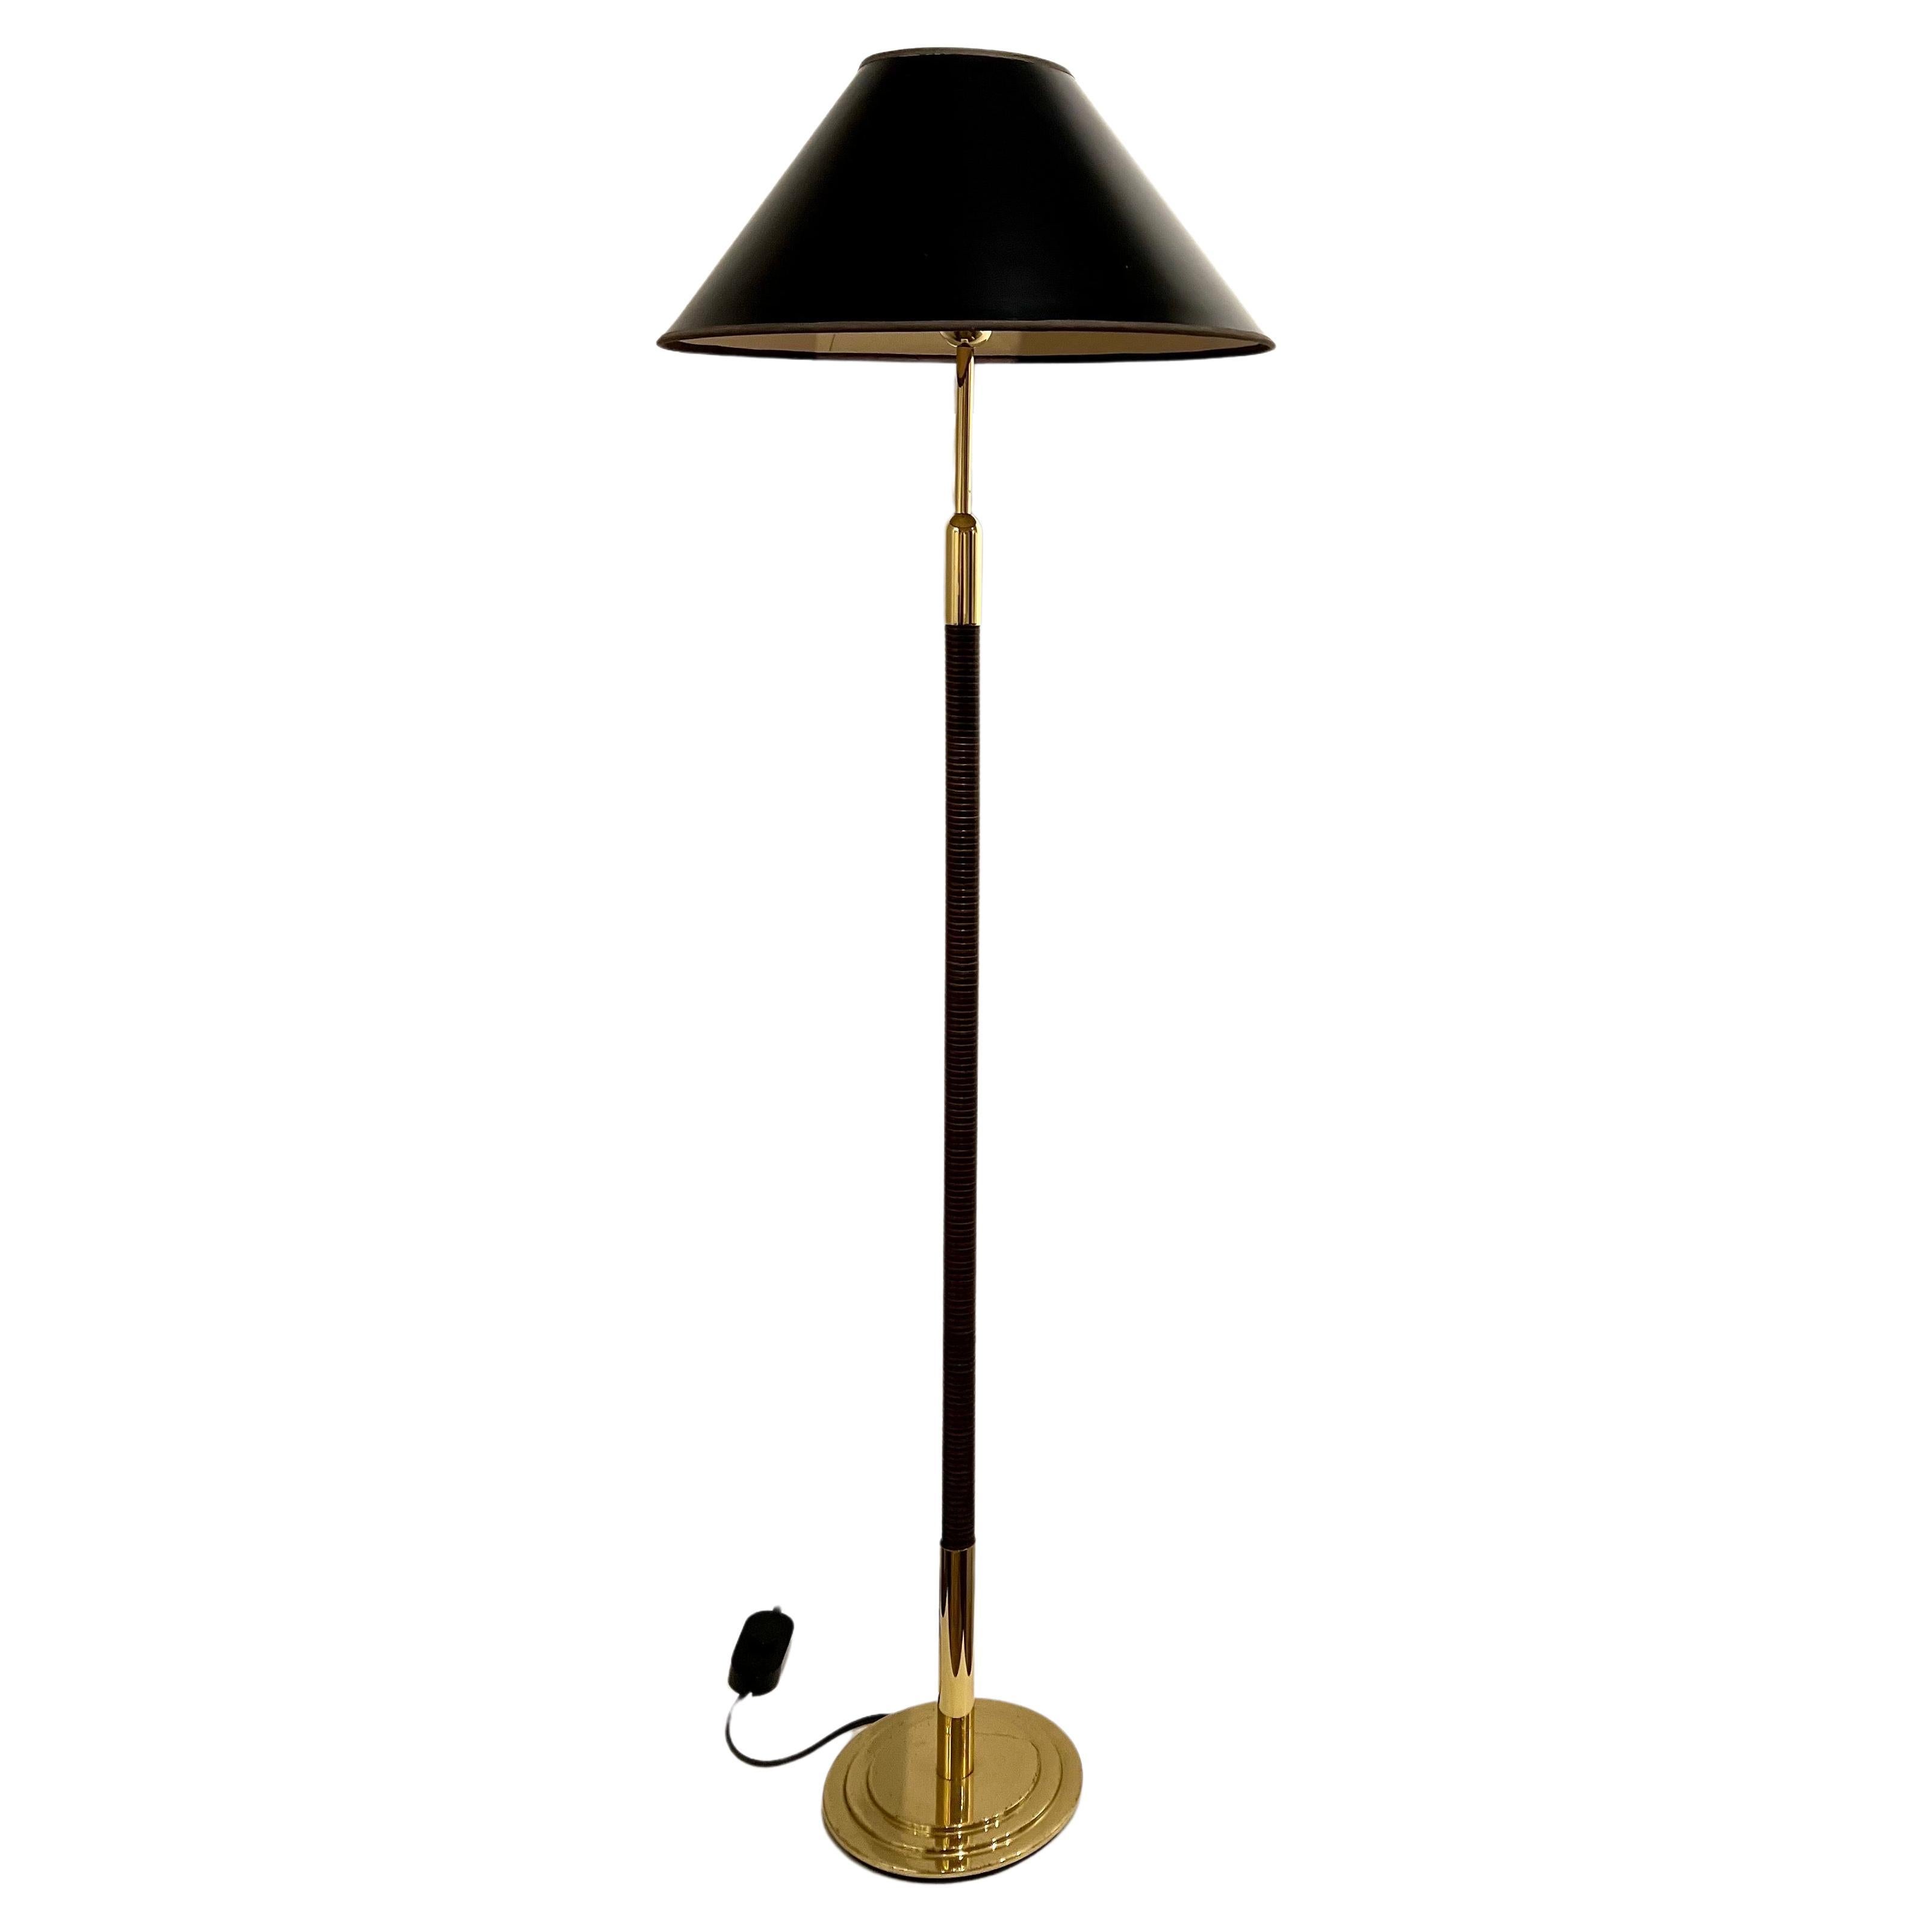 Beautiful elegant polished brass Floor and table lamps set, circa the 1980s with cane-wrapped pole original lampshades, perfect working condition. The desk lamp and 8